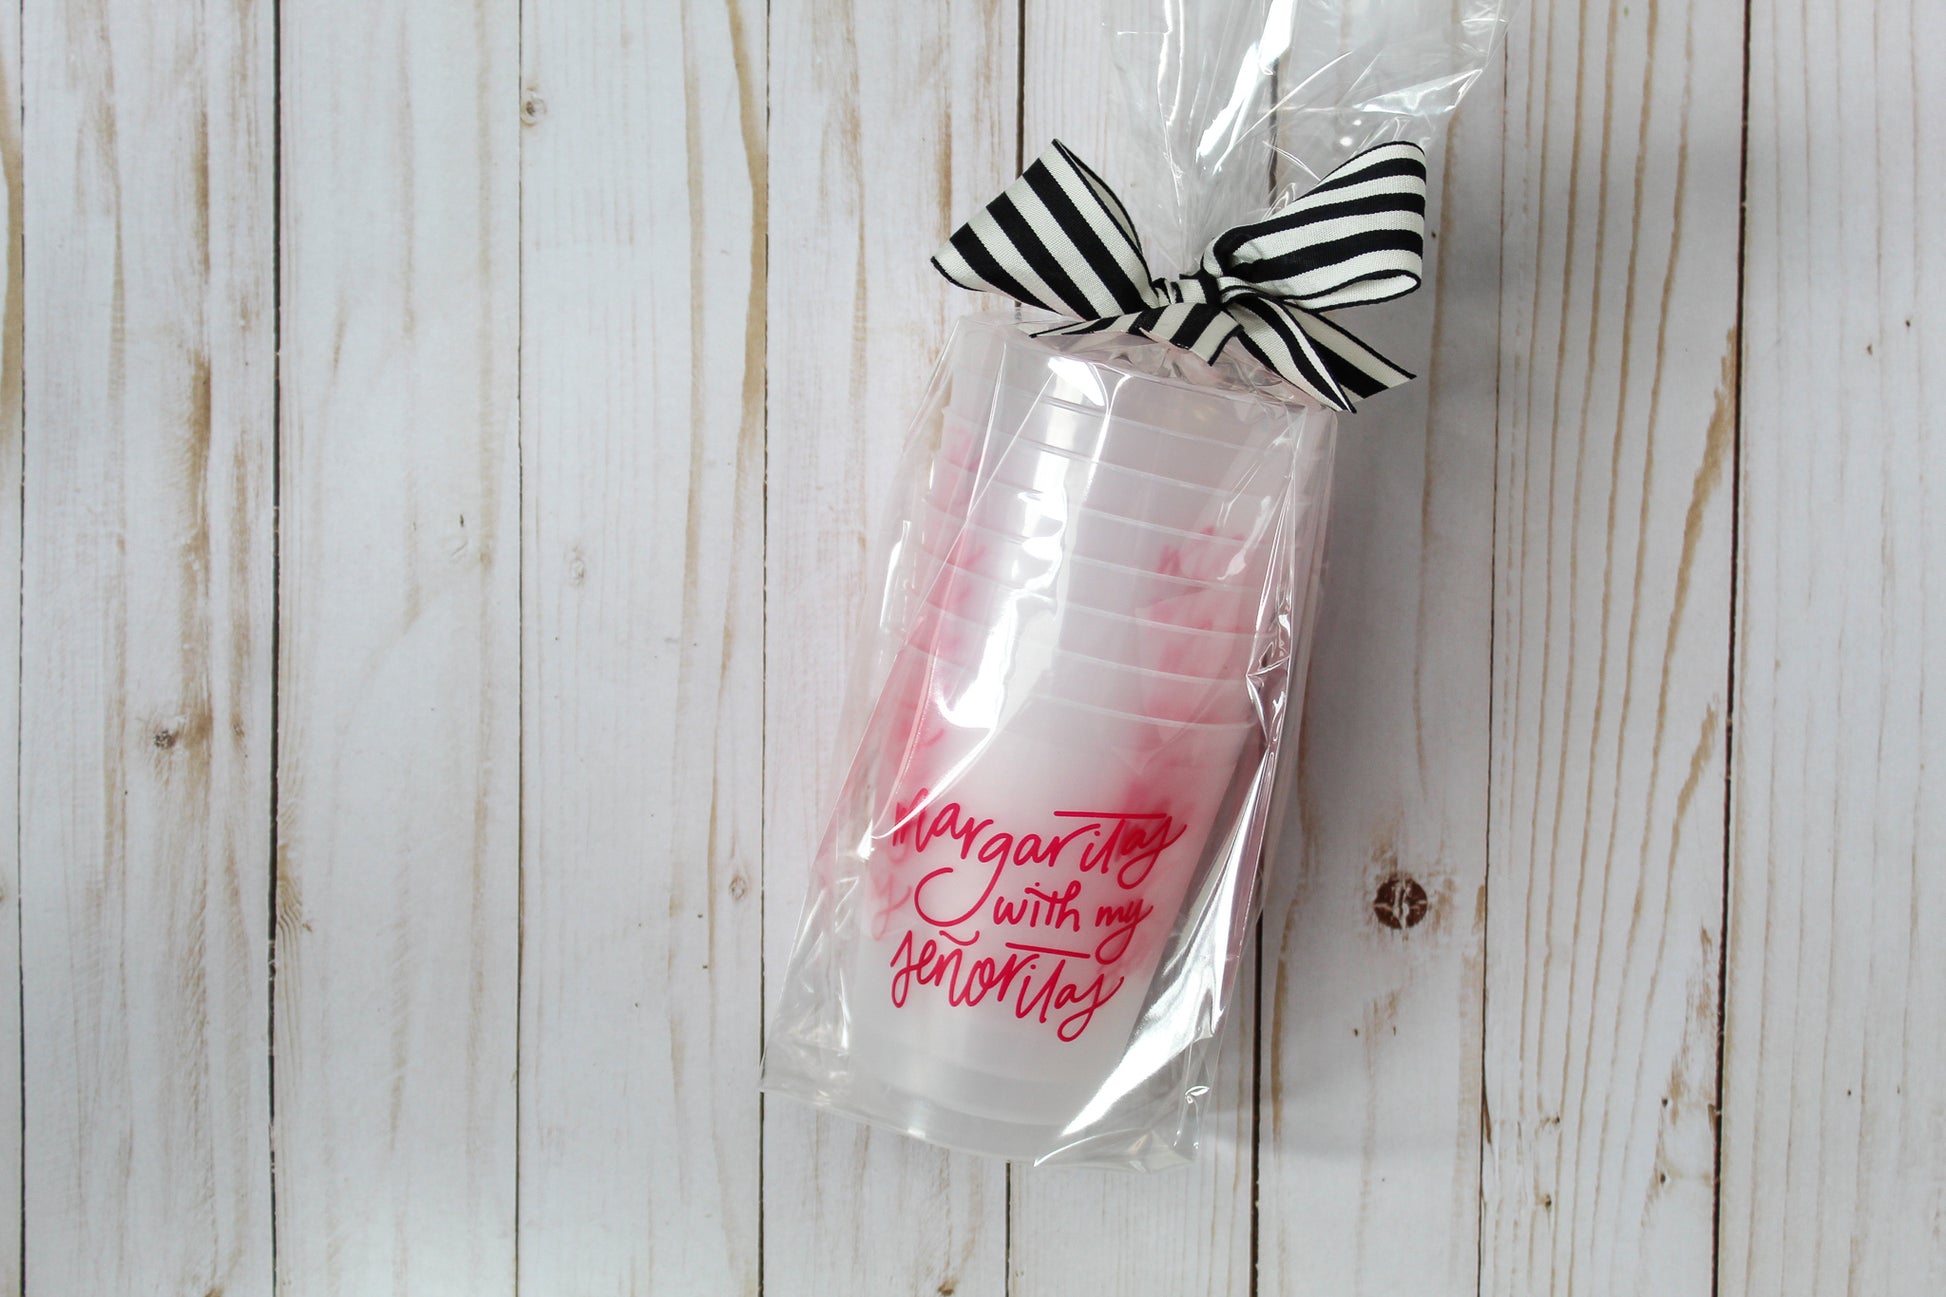 VALENTINES DAY CUPS - Valentines Party Cups Valentines Gifts Valentines Day  Gifts Valentines Day Favor Cups Valentine's Day Cups Valentines